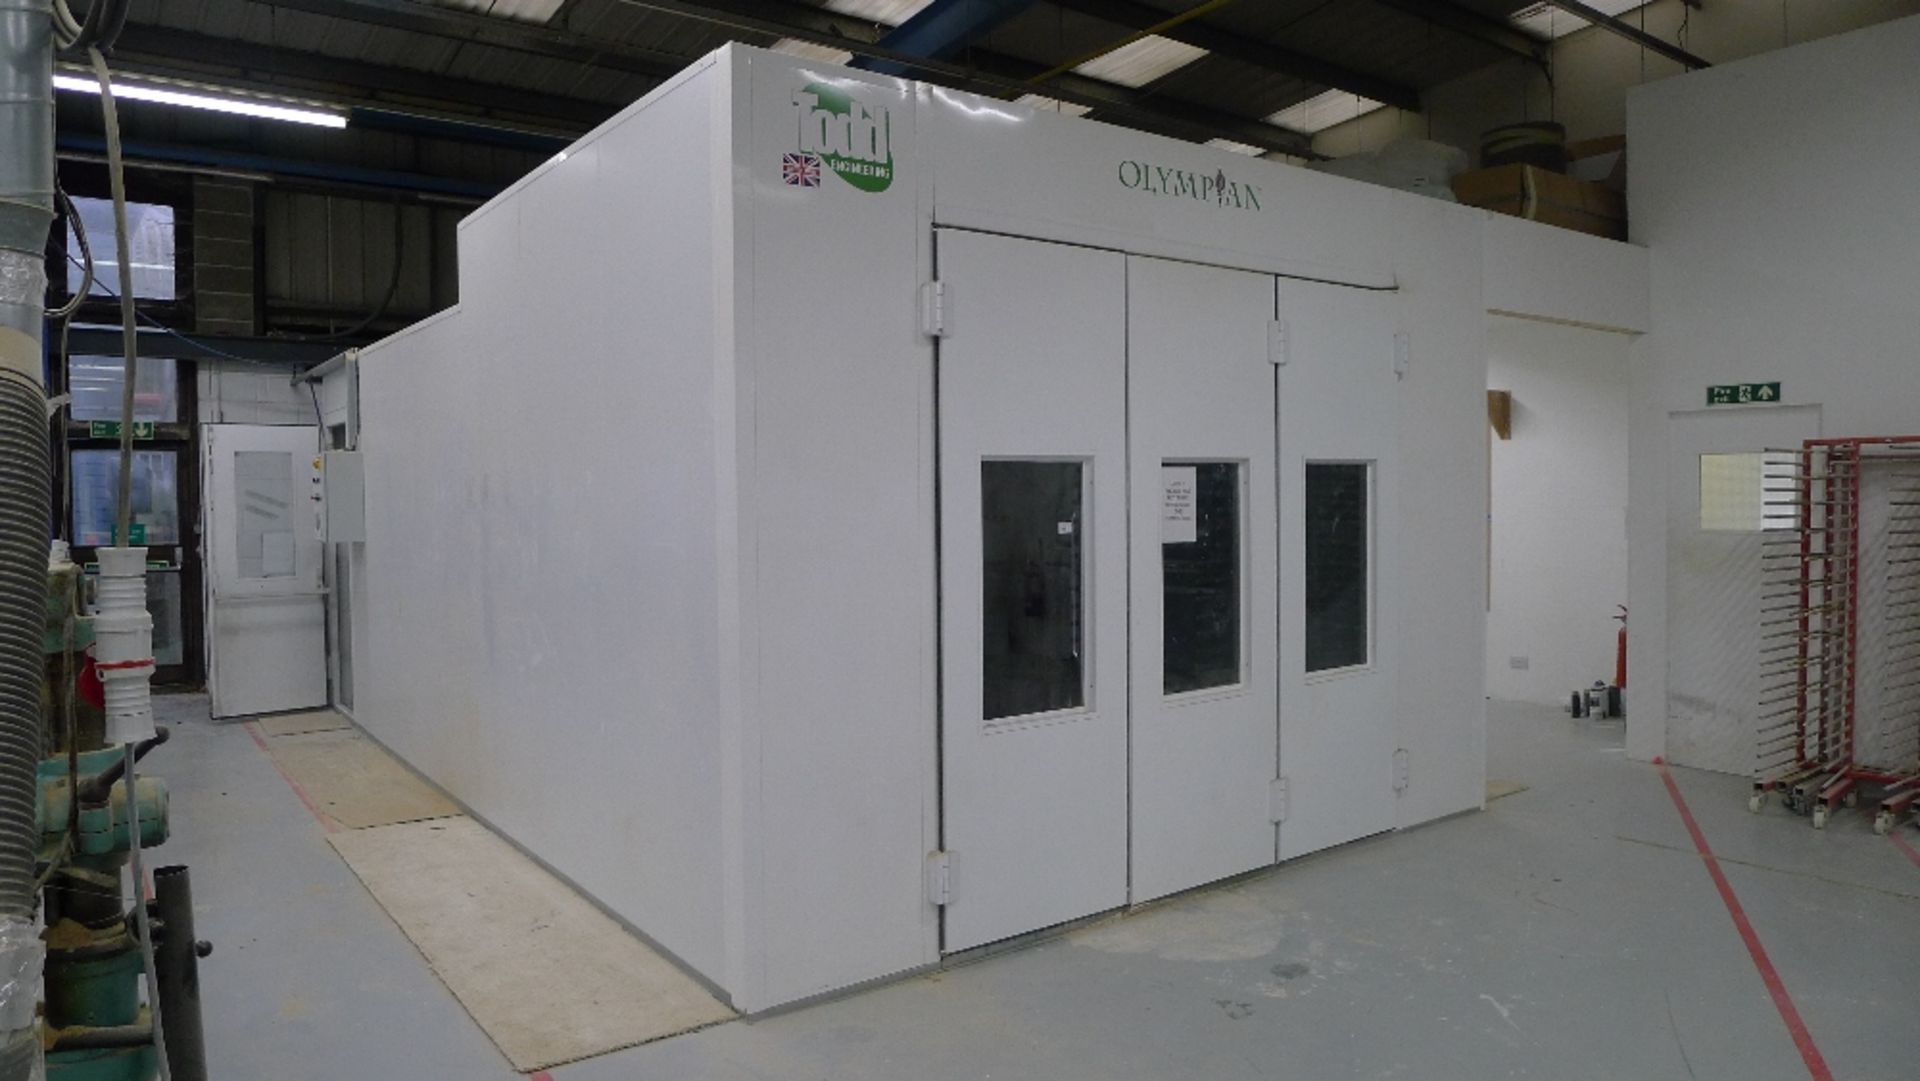 1 heated spray booth by Todd Engineering type Olympian 1000 series, approx 24 ft x 12 ft with tri-